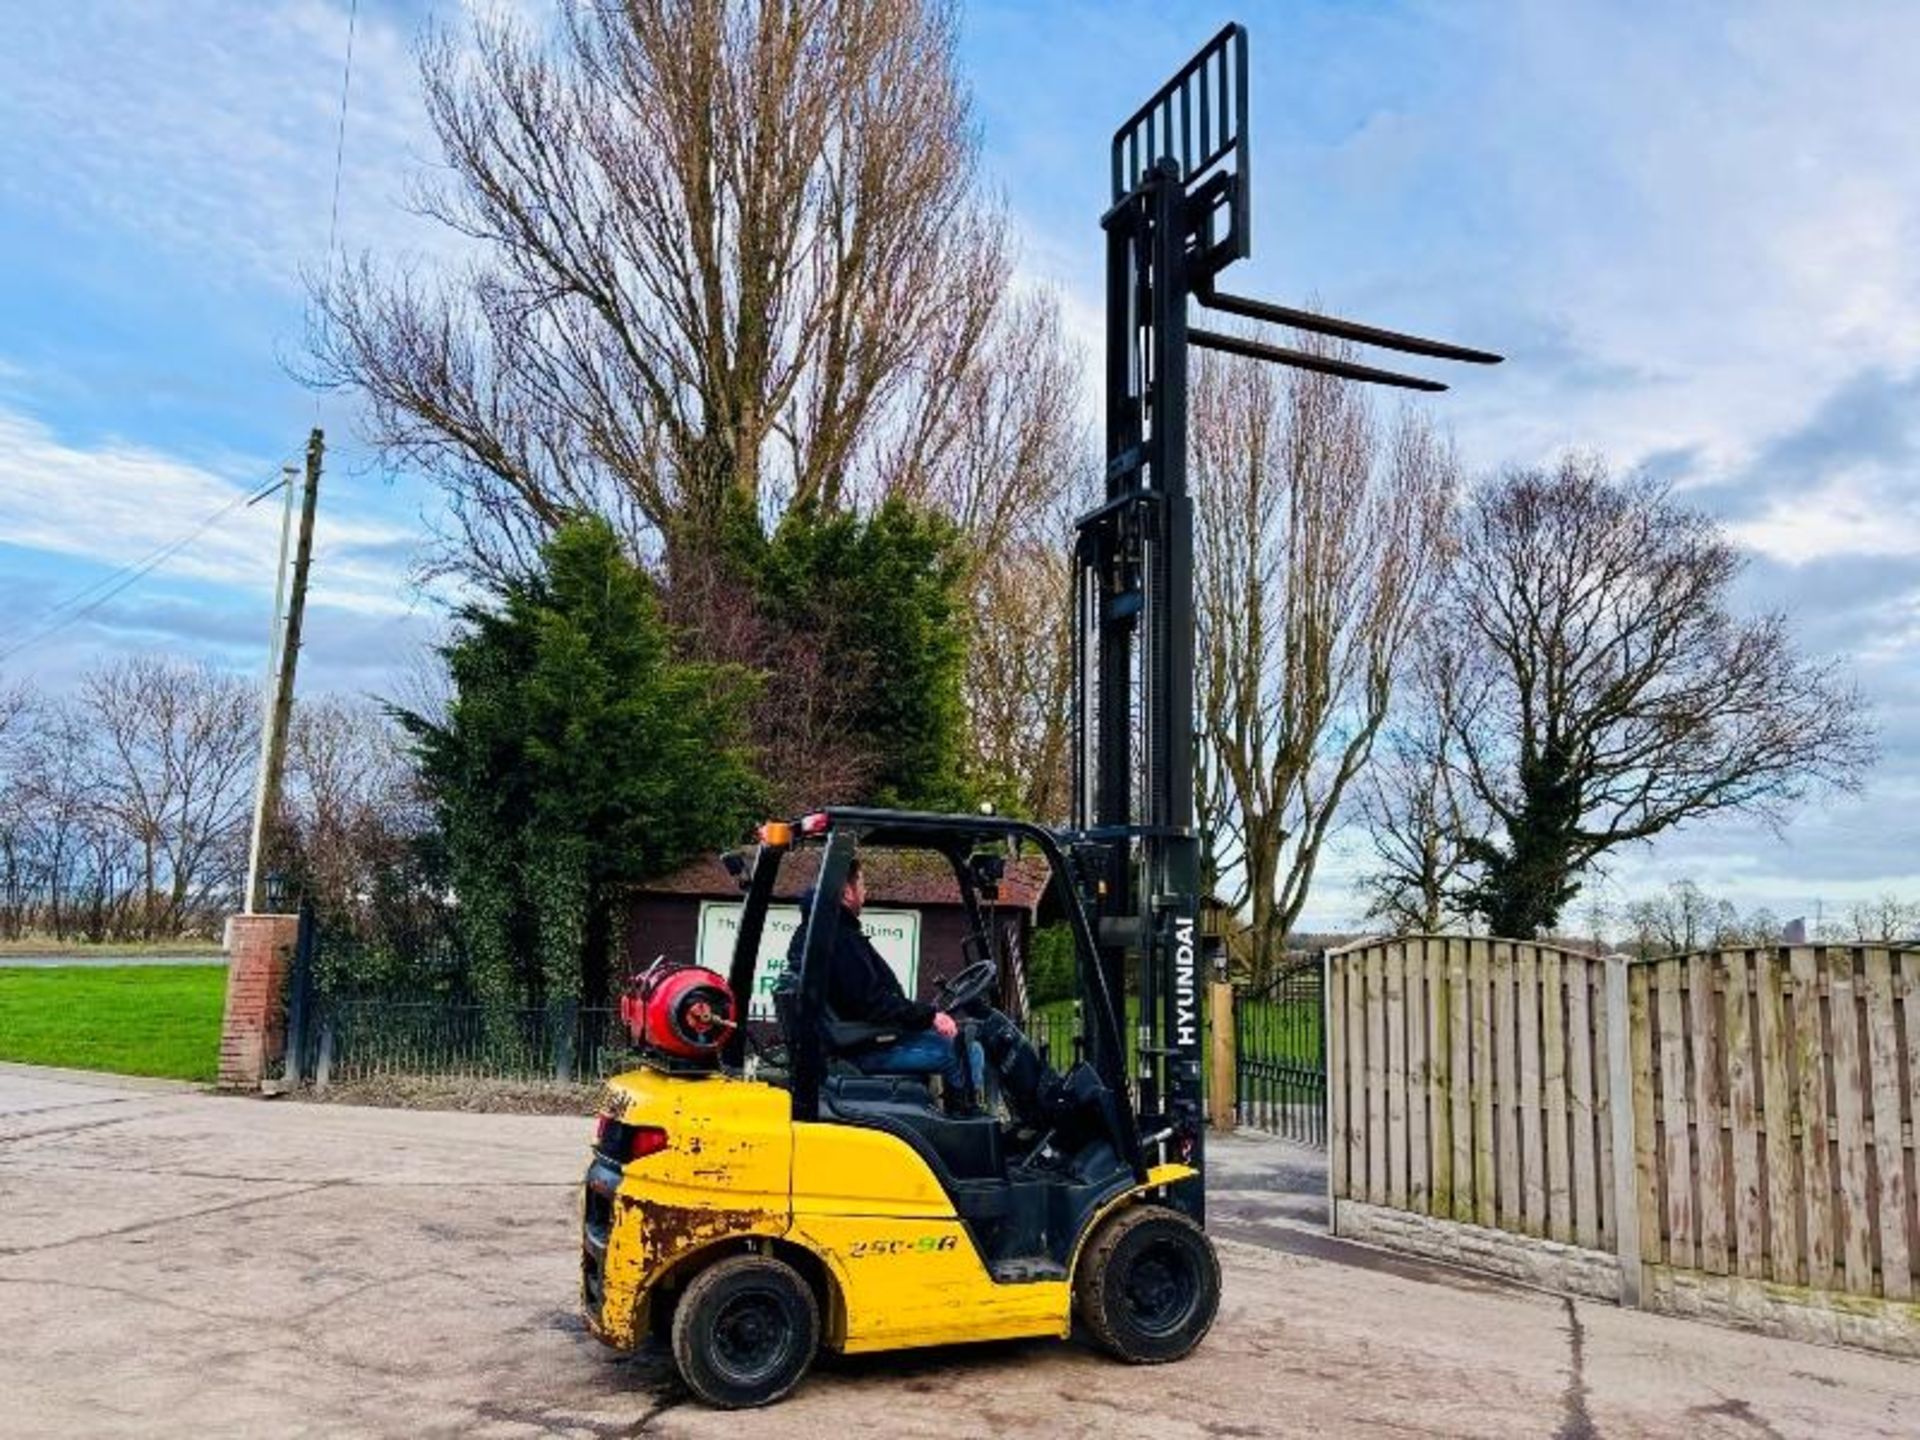 HYUNDAI 25L-9A CONTAINER SPEC FORKLIFT *YEAR 2017, 4463 HOURS* C/W PALLET TINES - Image 11 of 18